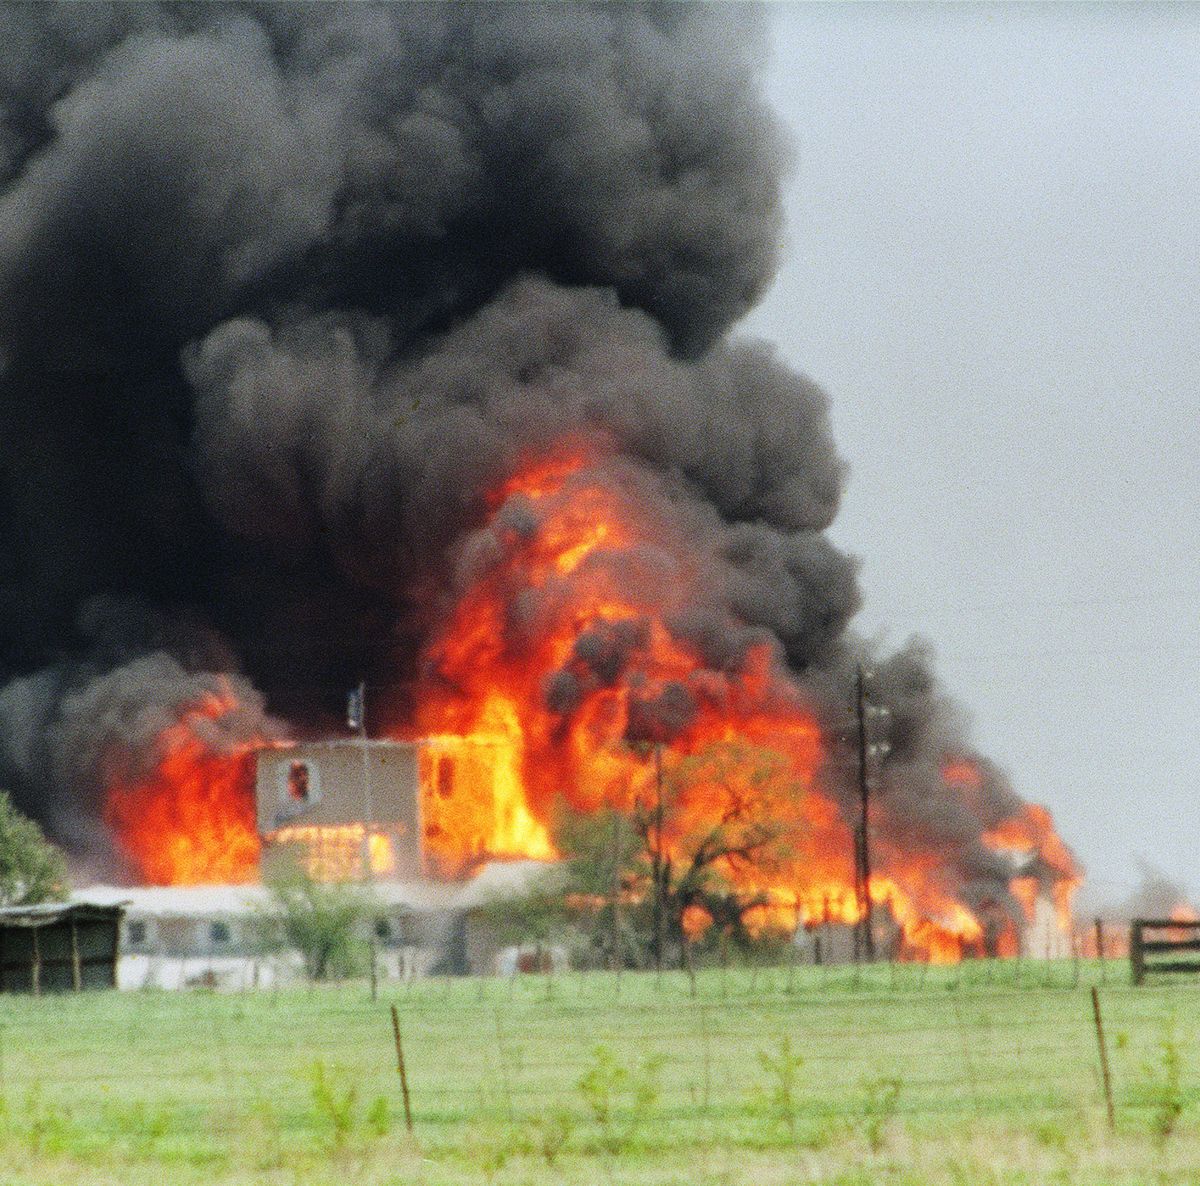 flames erupting from a compound, with smoke billowing into the air